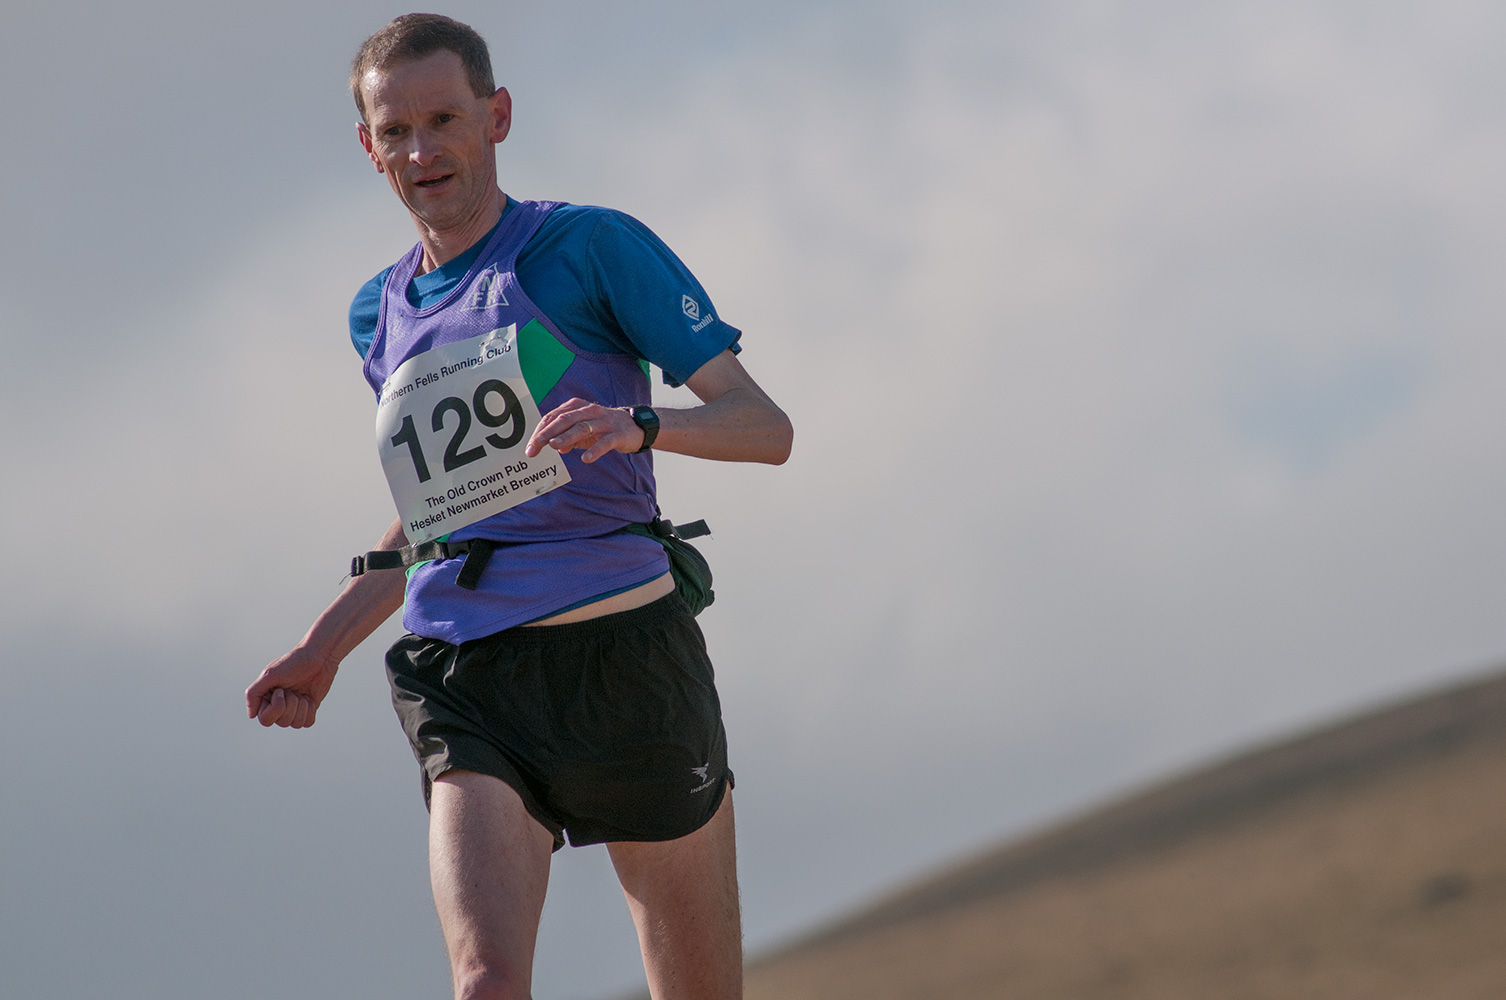 The inaugural Carrock Fell Race - a 9km race from Calebreck to the summit of Carrock and back over High Pike - was run on 20th March 2016.